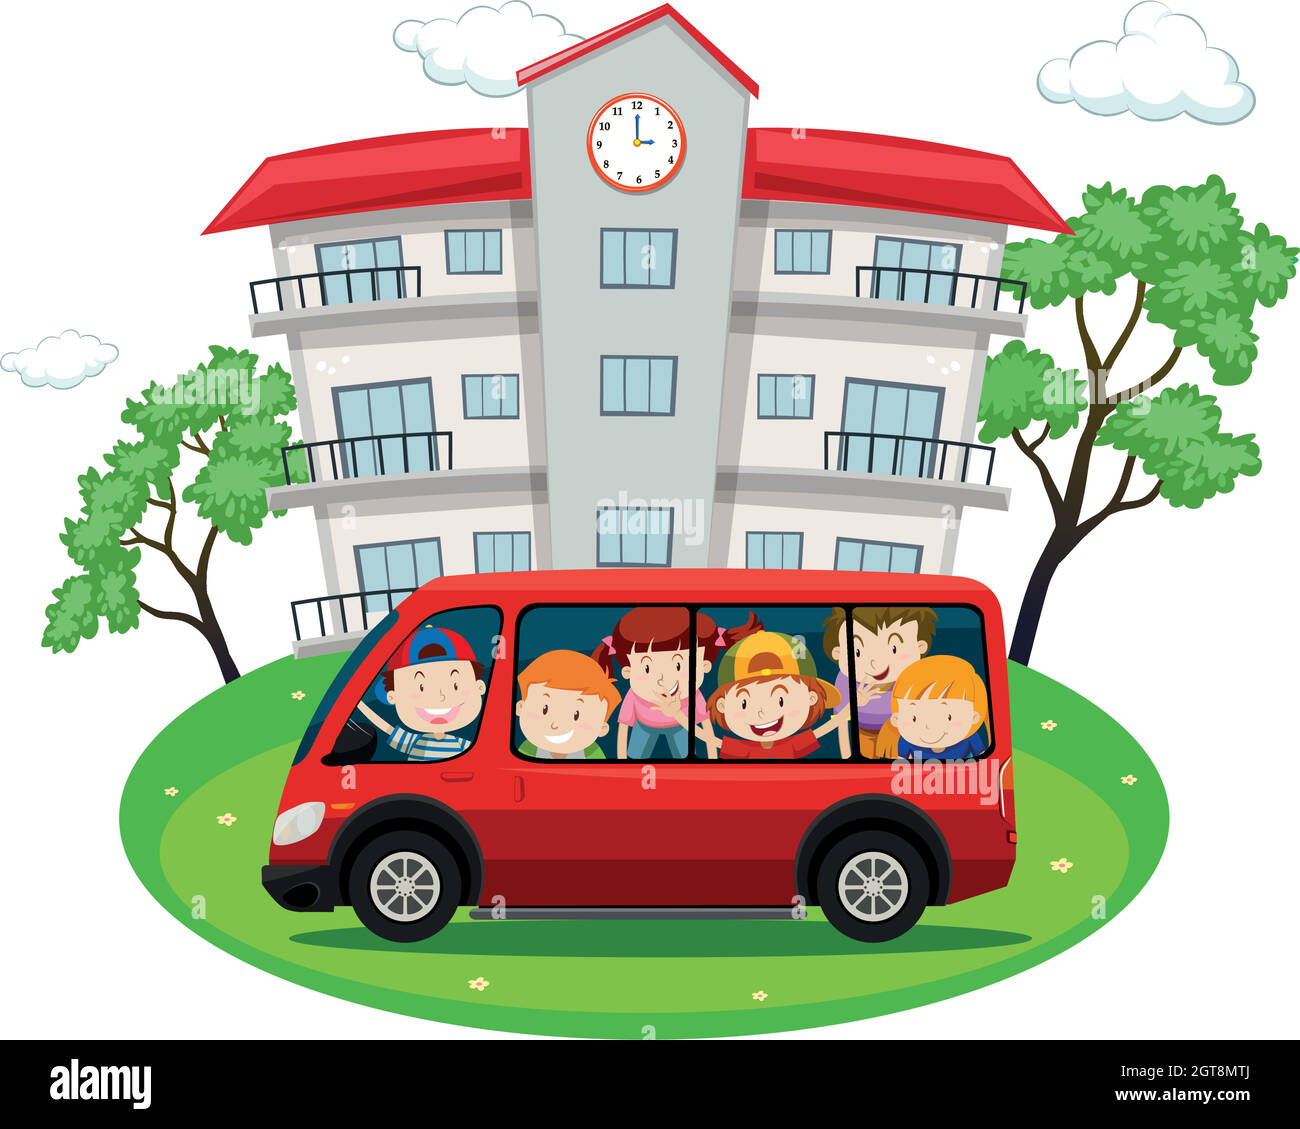 Students riding on red van to school Stock Vector